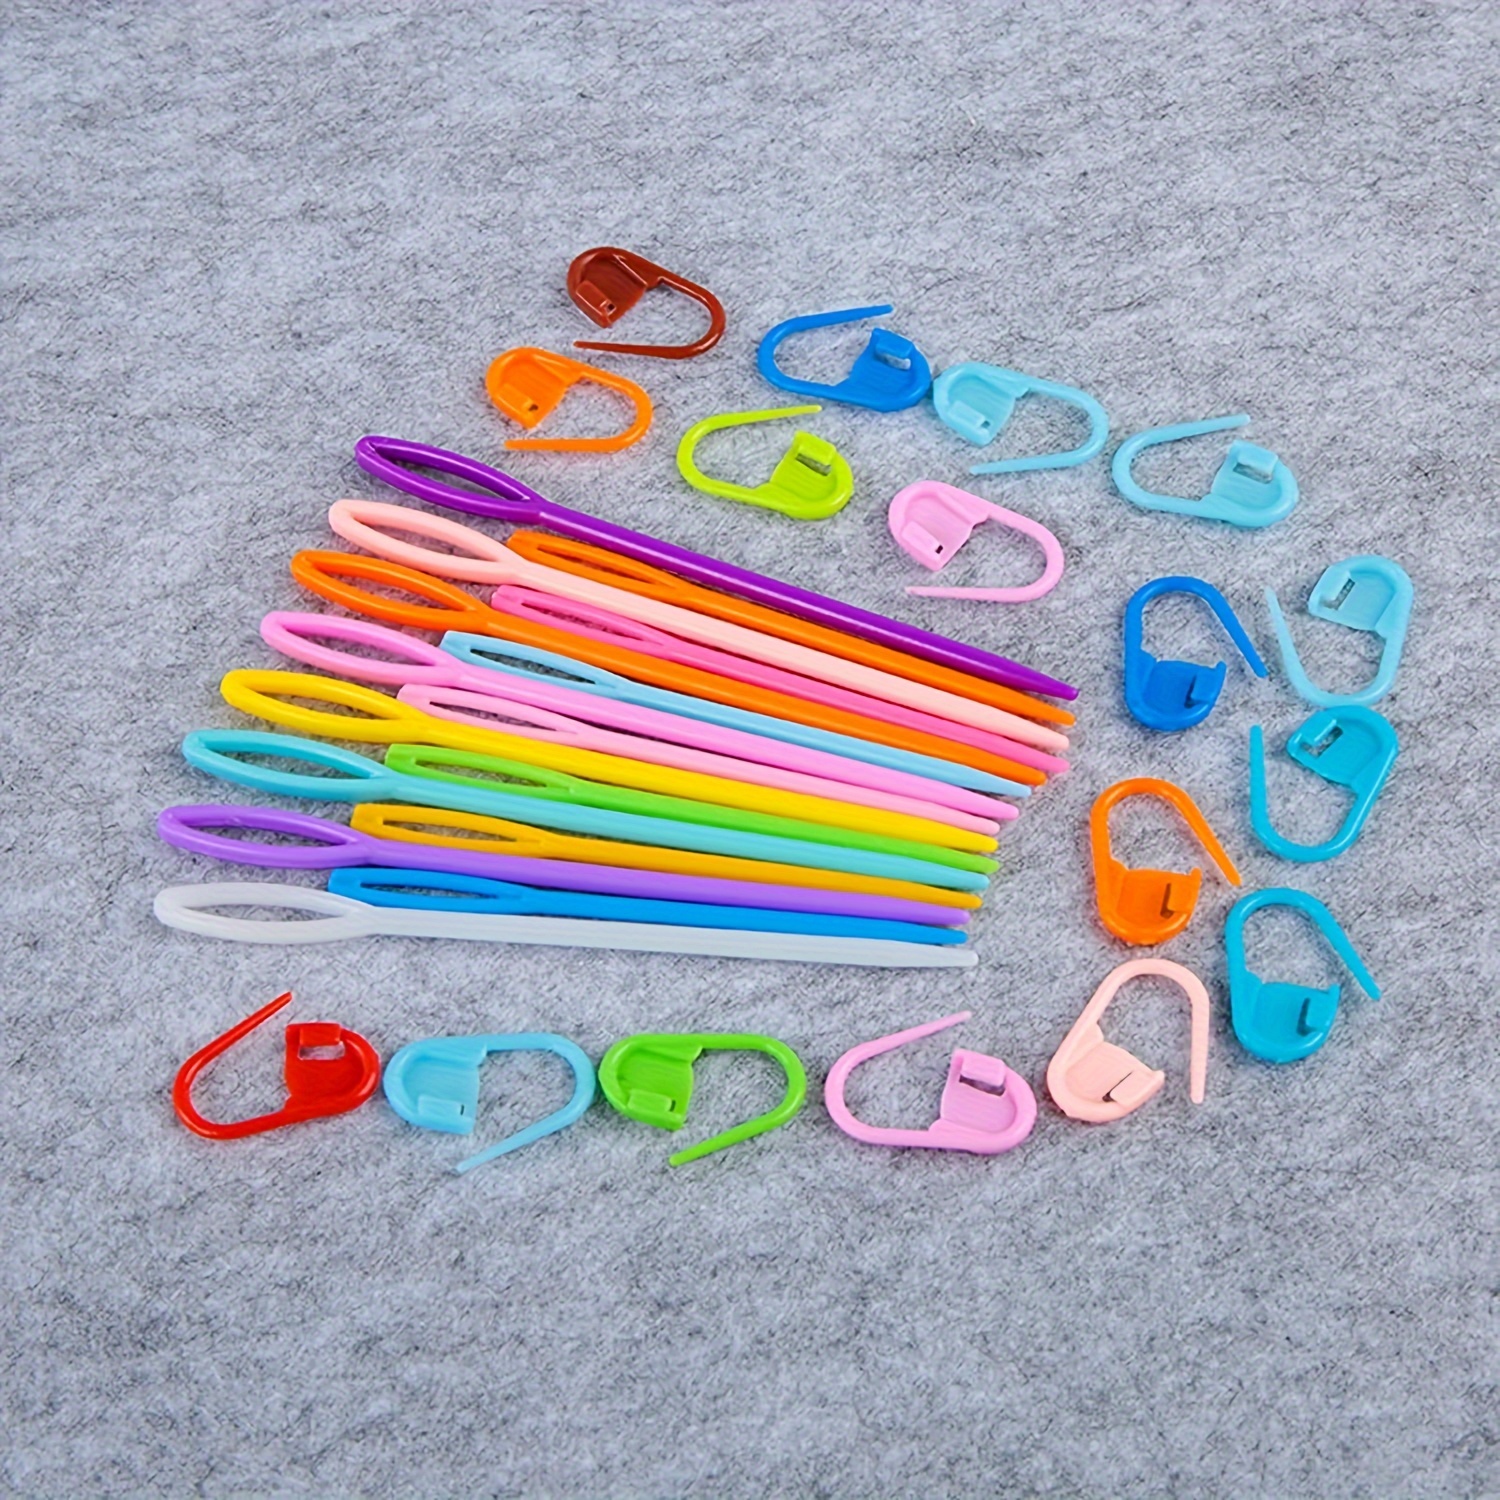 

100 Pcs Locking Stitch Markers Crochet Counter Needle Clip And 20 Pcs Large Eye Plastic Sewing Needles Set For Knitting & Crochet - Multicolor